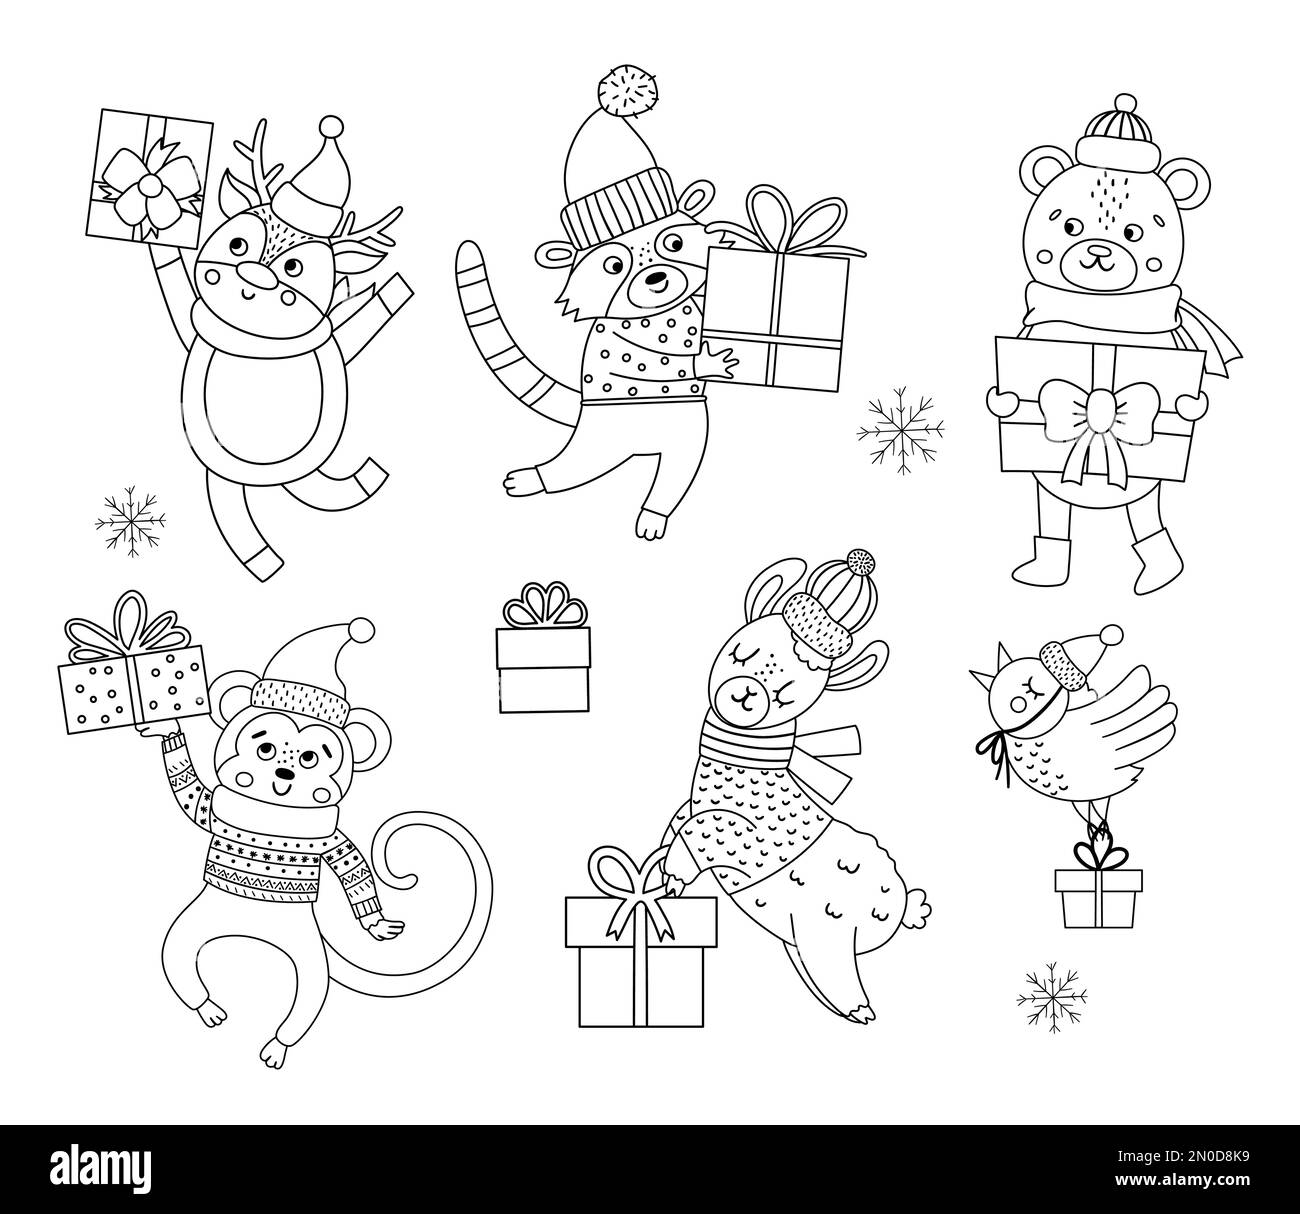 Cute black and white vector animals in hats, scarves and sweaters with presents and snowflakes. Winter set of with gifts. Funny Christmas coloring pag Stock Vector